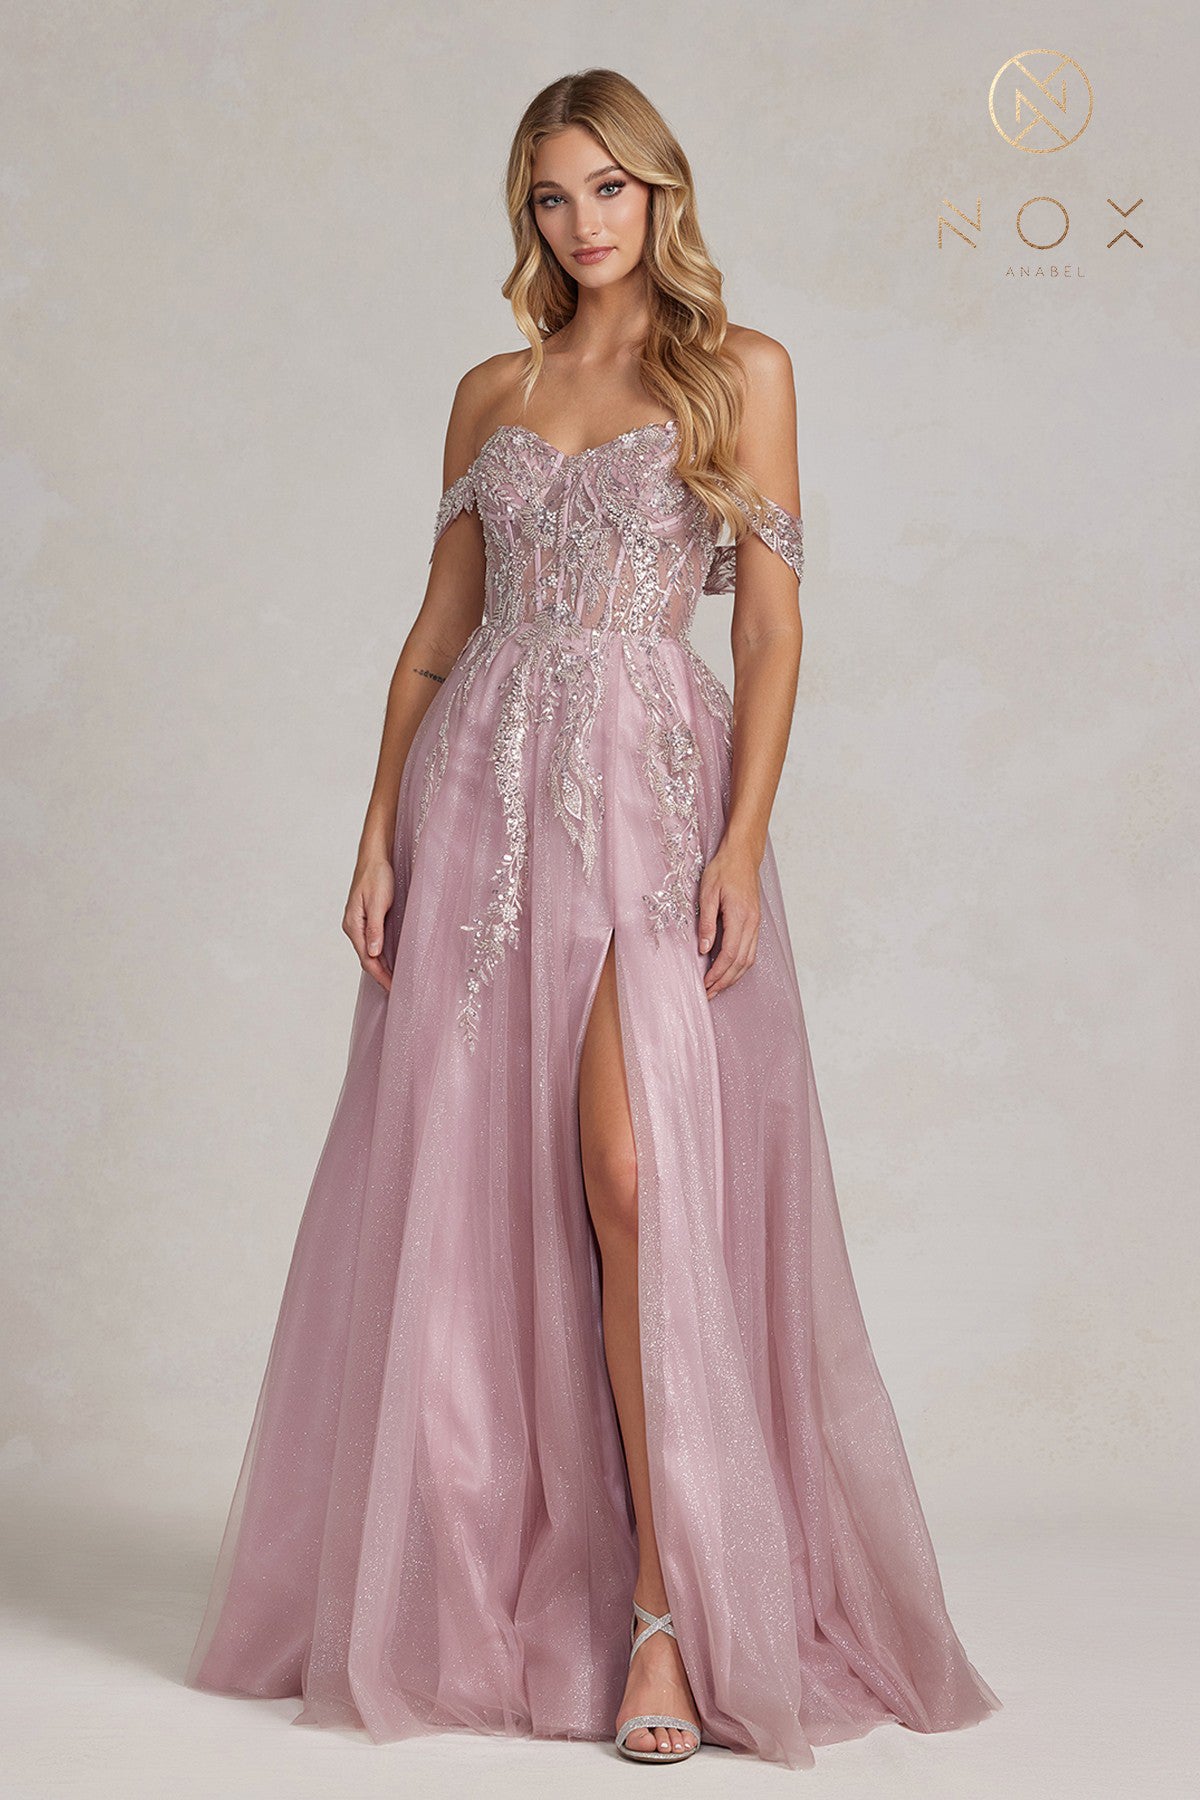 Off-Shoulder A-Line Prom Dress By Nox Anabel -E1128